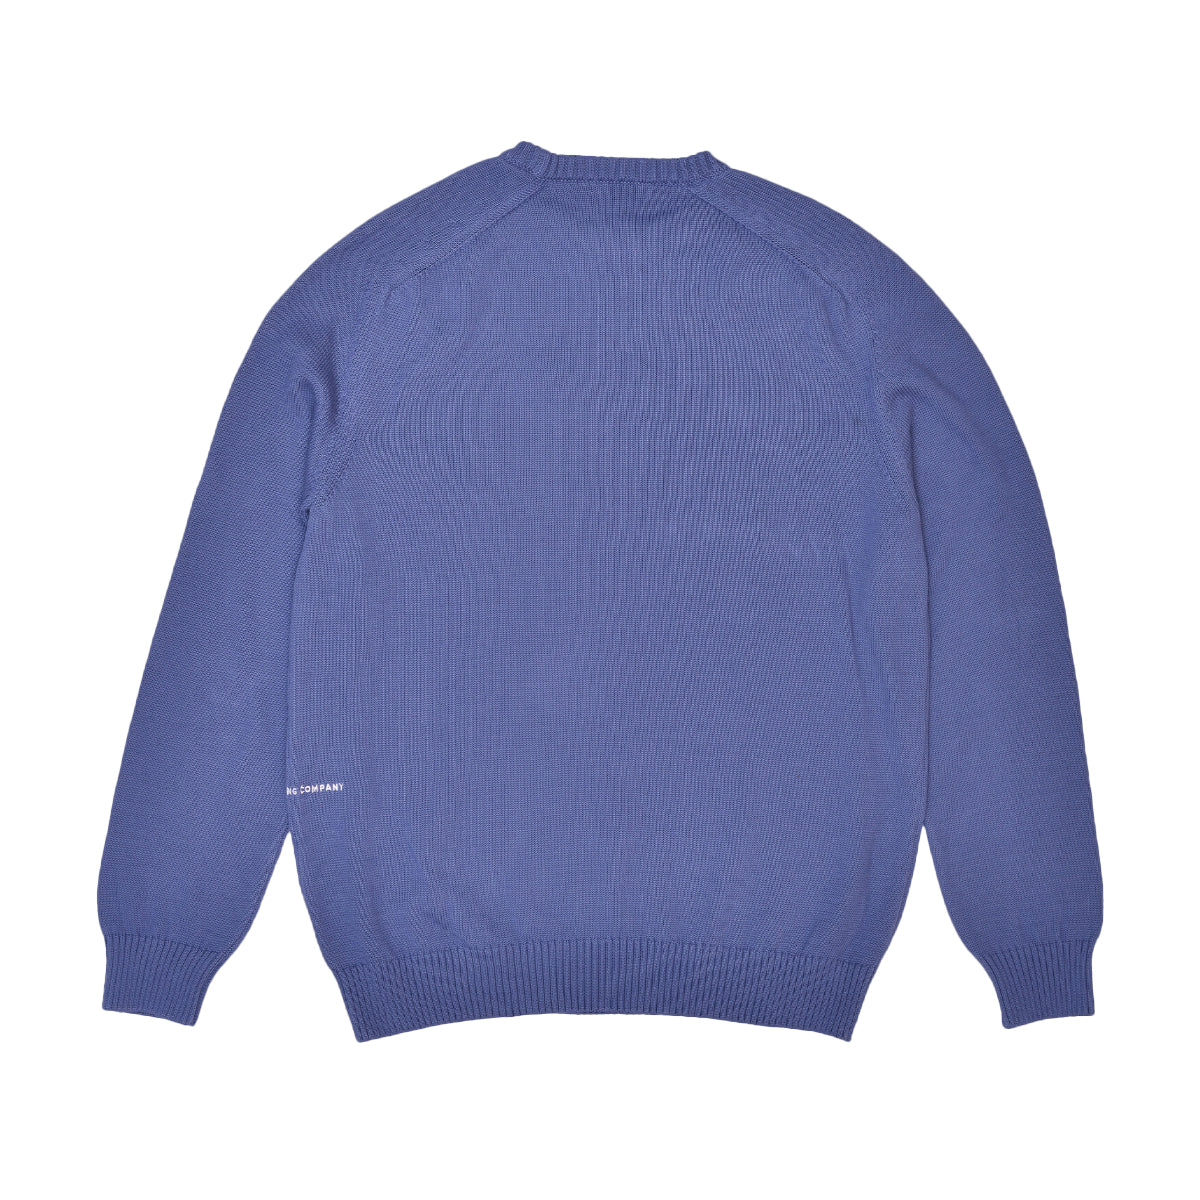 Pop Trading Company - Pop Trading Co - Arch Knitted Crewneck - Coastal Fjord